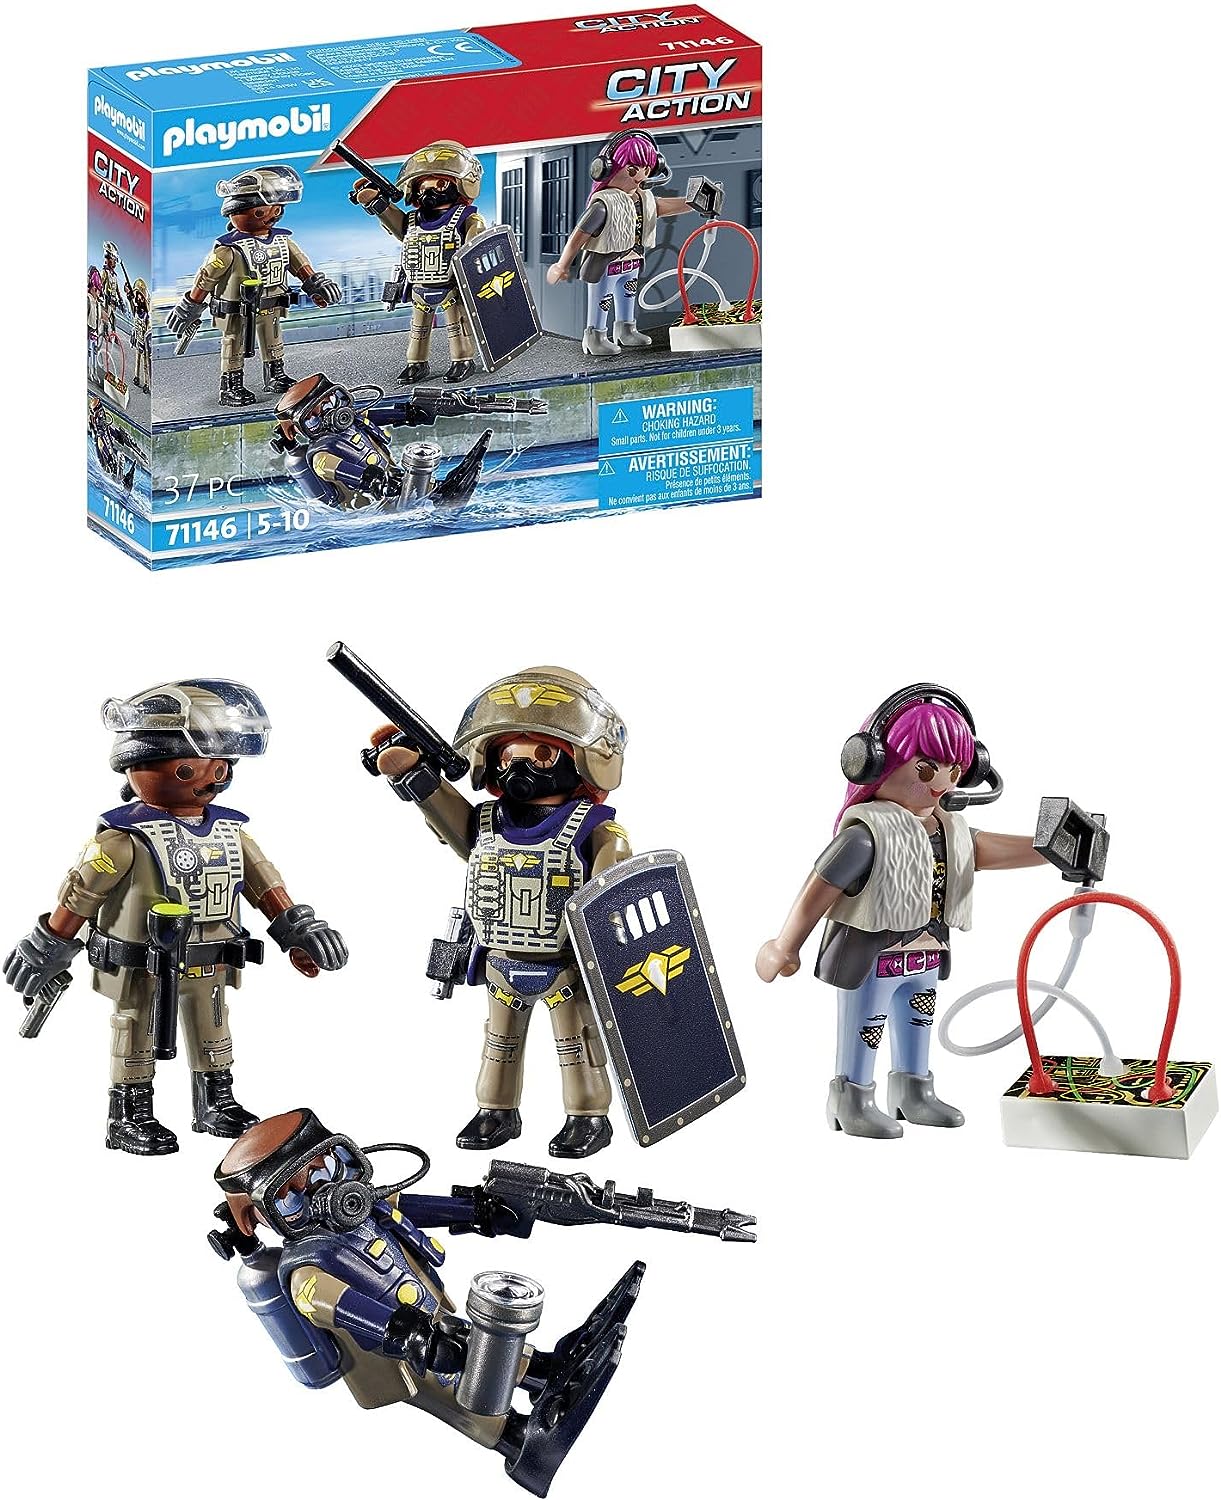 PLAYMOBIL City Action 71146 SWAT Figure Set, SEK Diver, SEK Task Force, SEK Manager and a Villain, Toy for Children from 5 Years